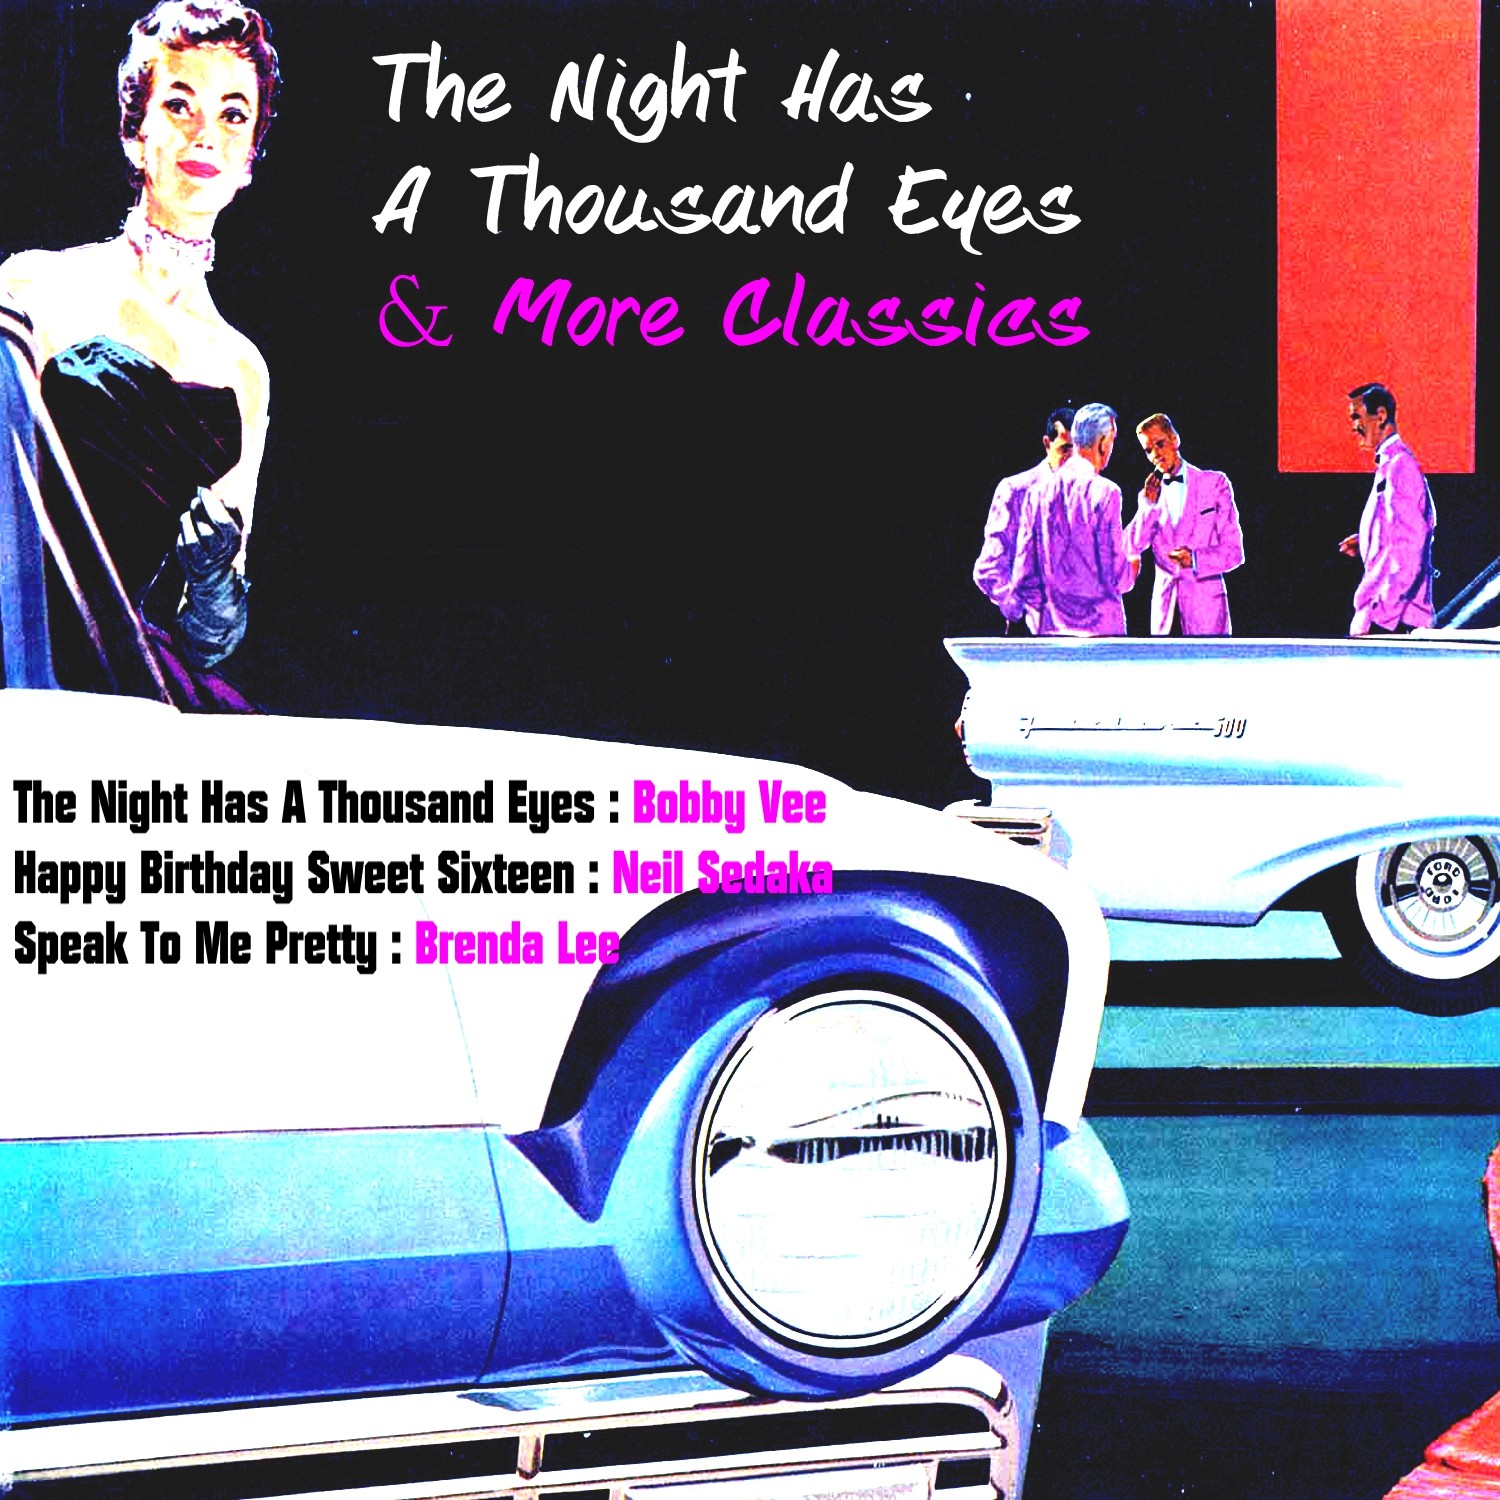 The Night Has a Thousand Eyes & More Classics